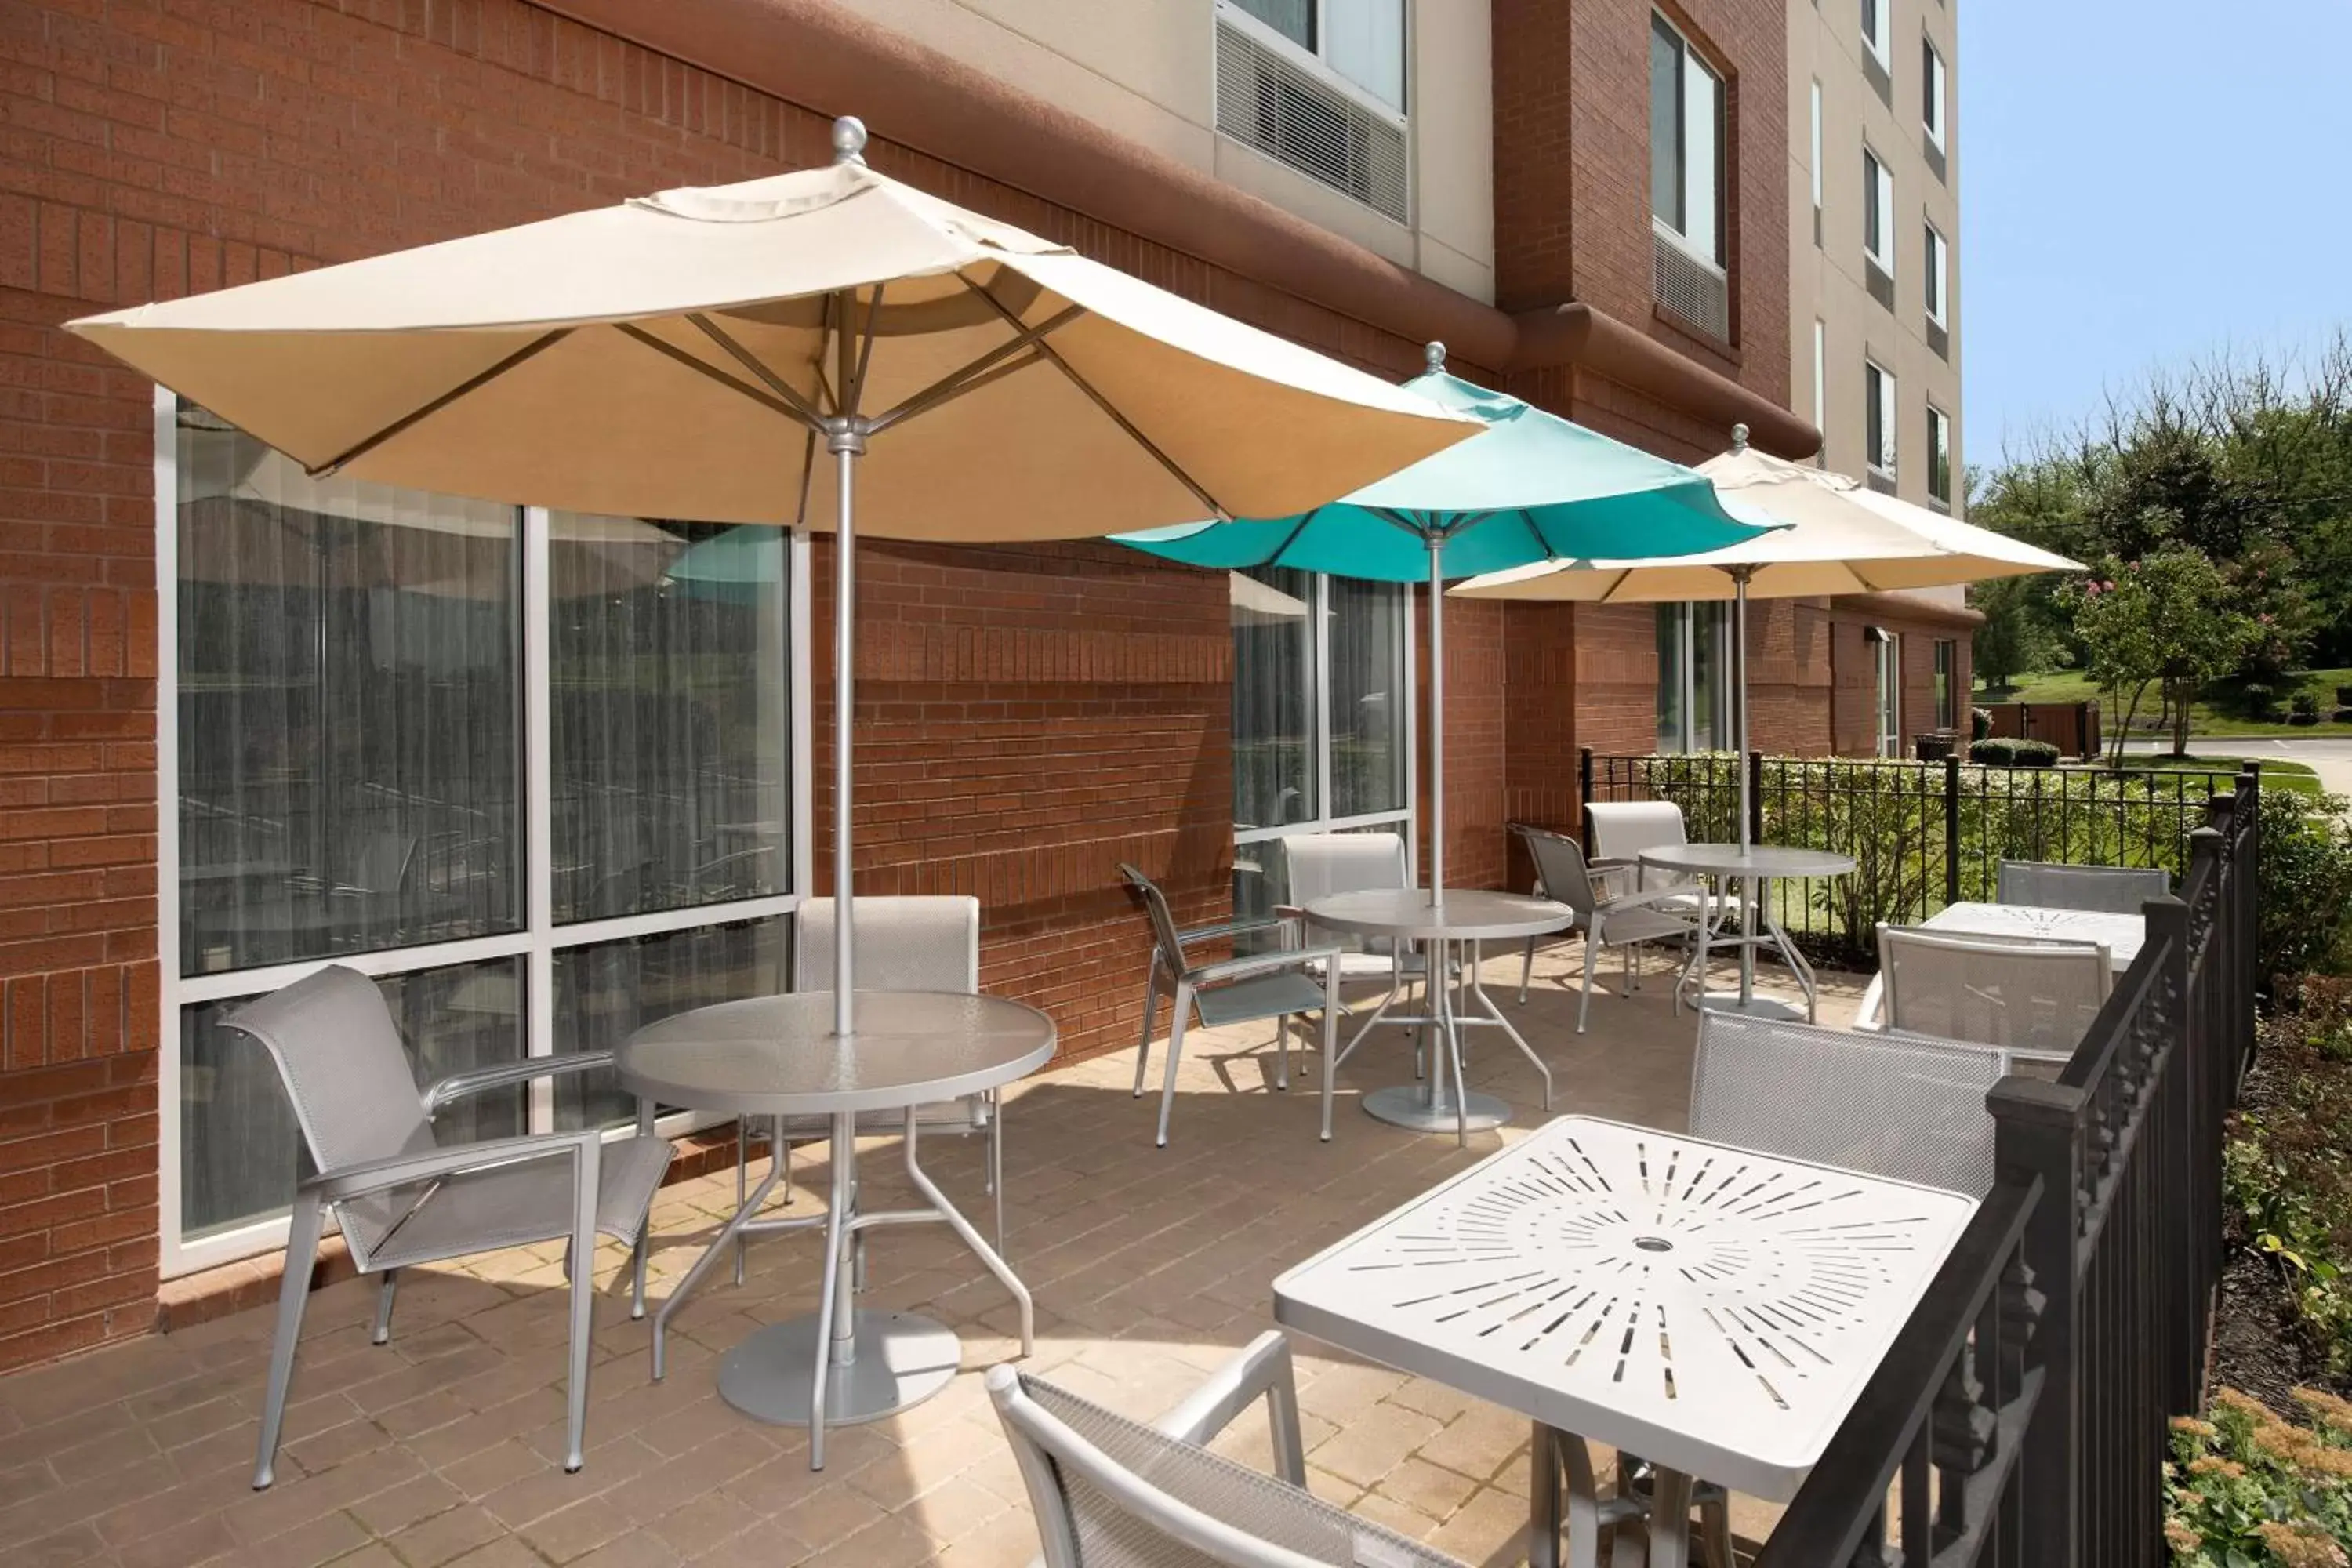 Property building in Fairfield Inn & Suites Baltimore BWI Airport